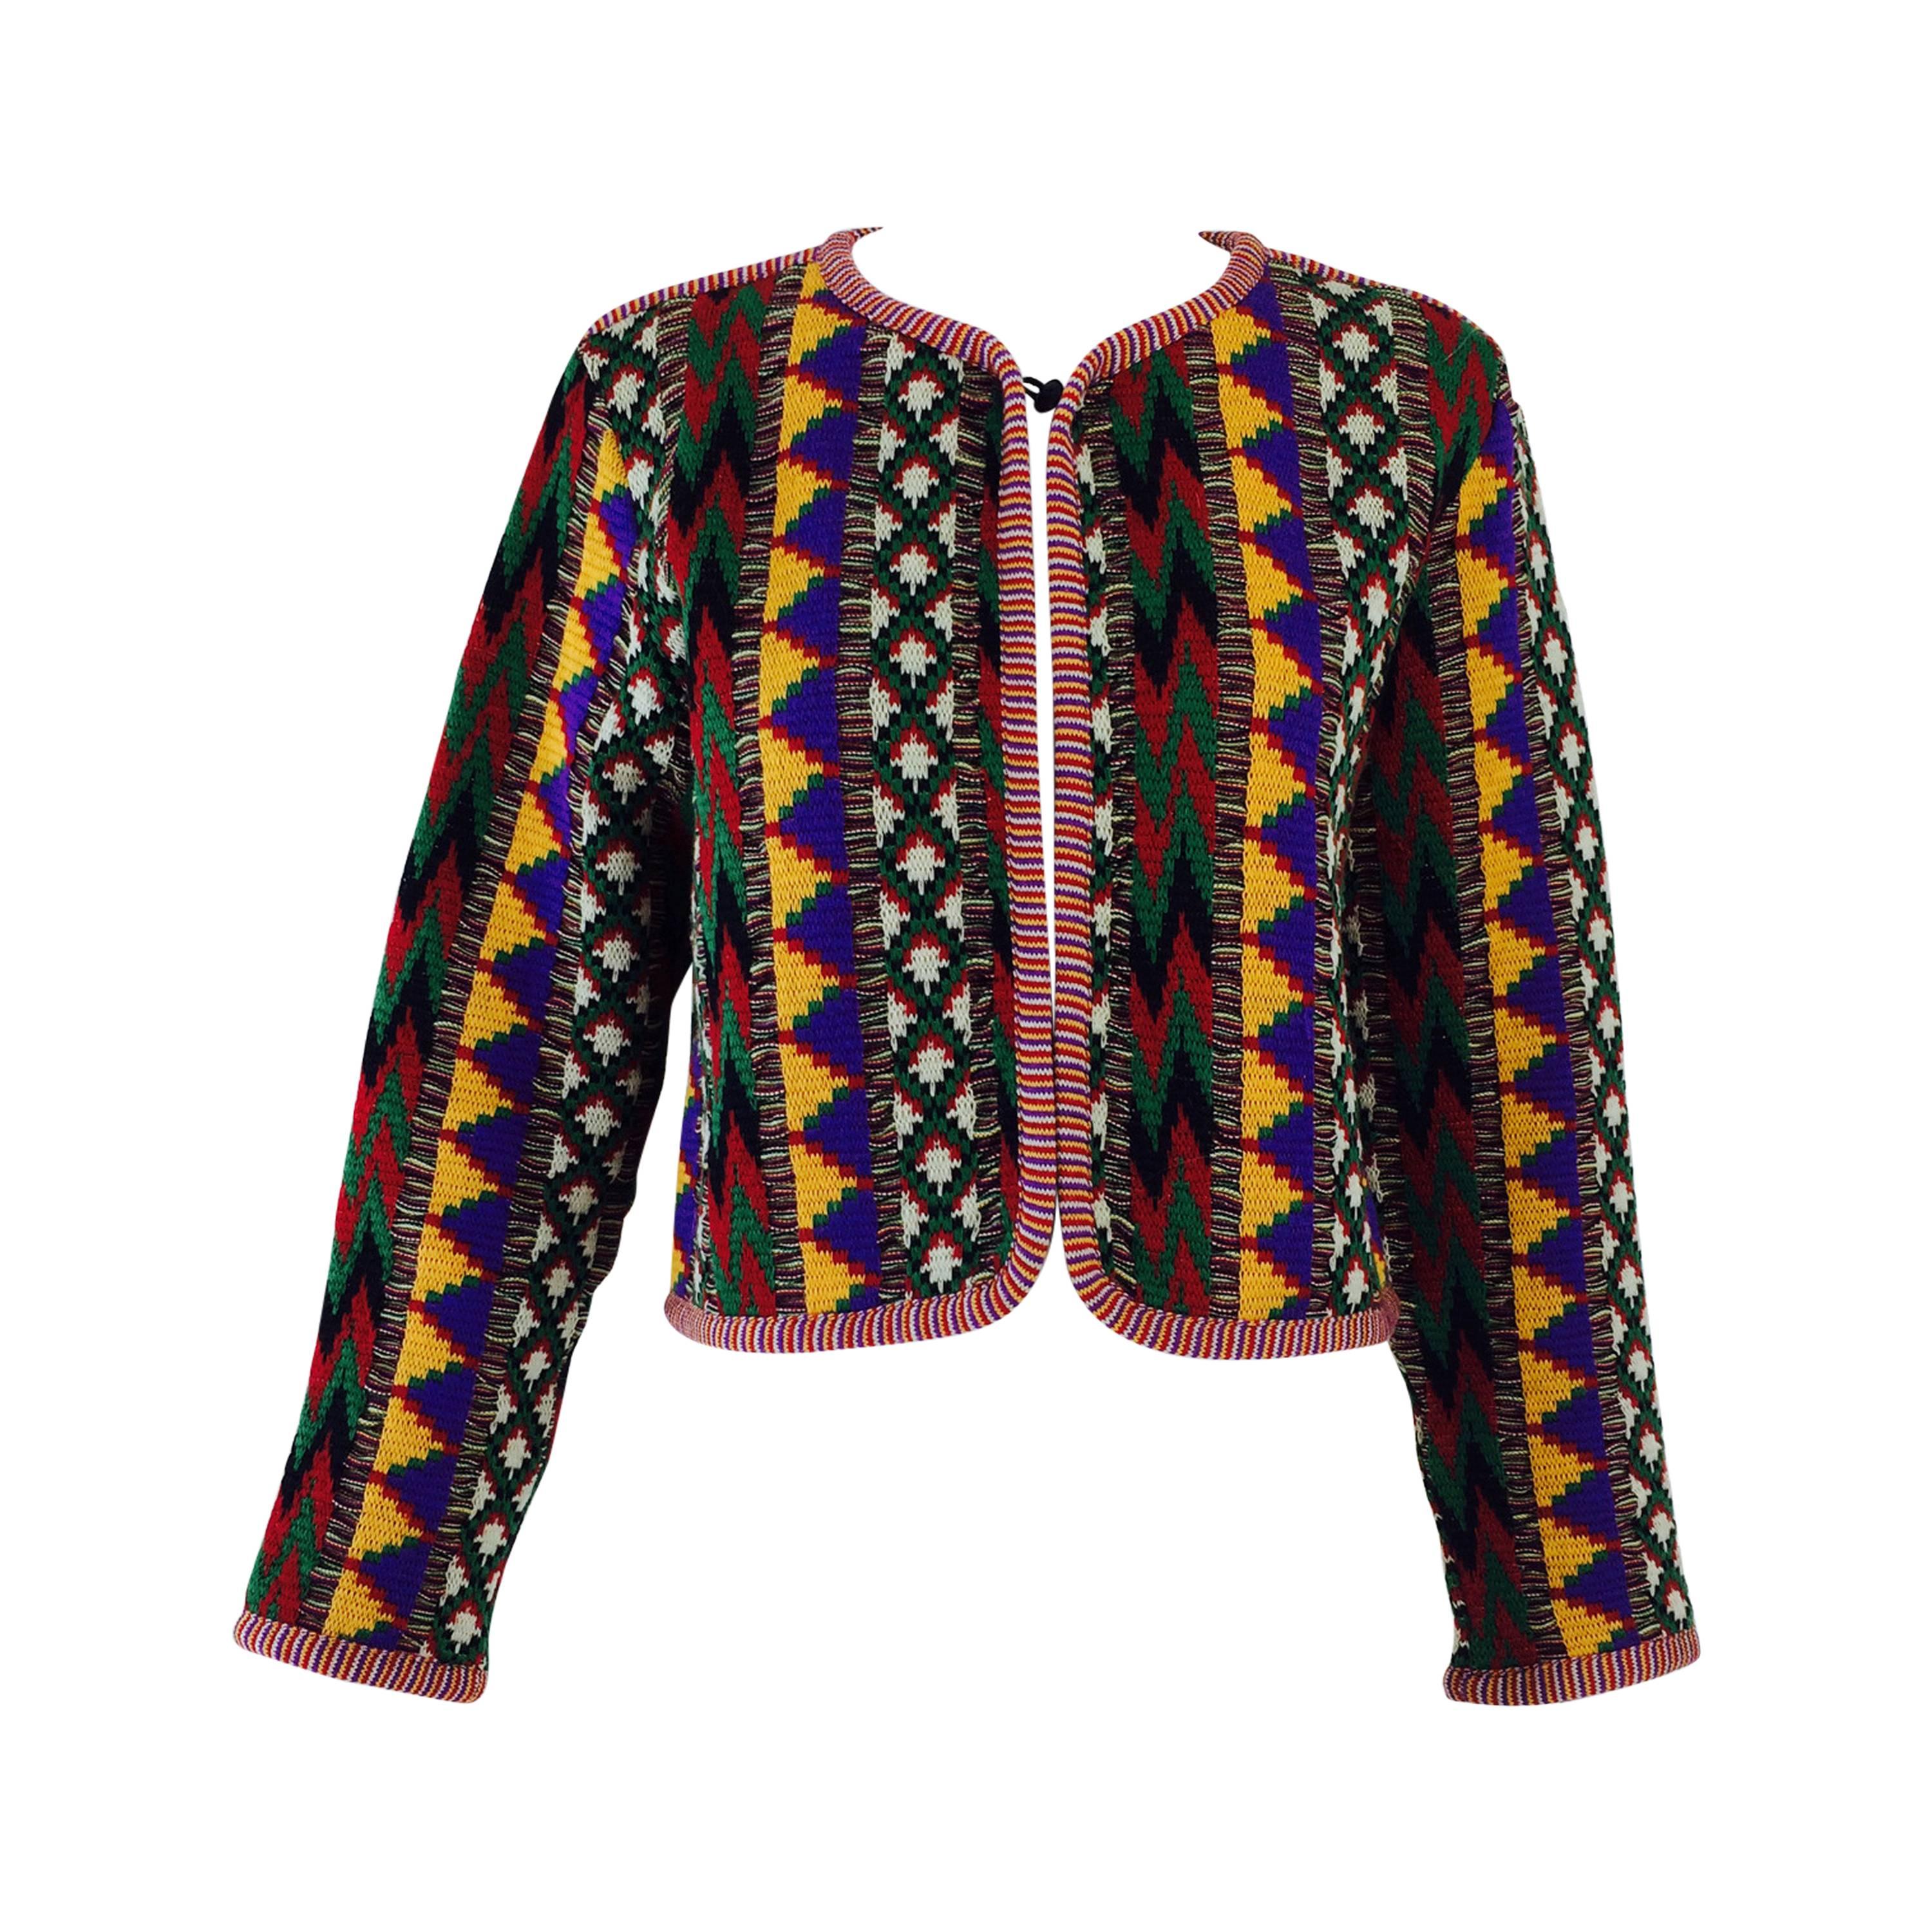 Yves St Laurent YSL Rive Gauche geometric tribal knit sweater 1970s at ...